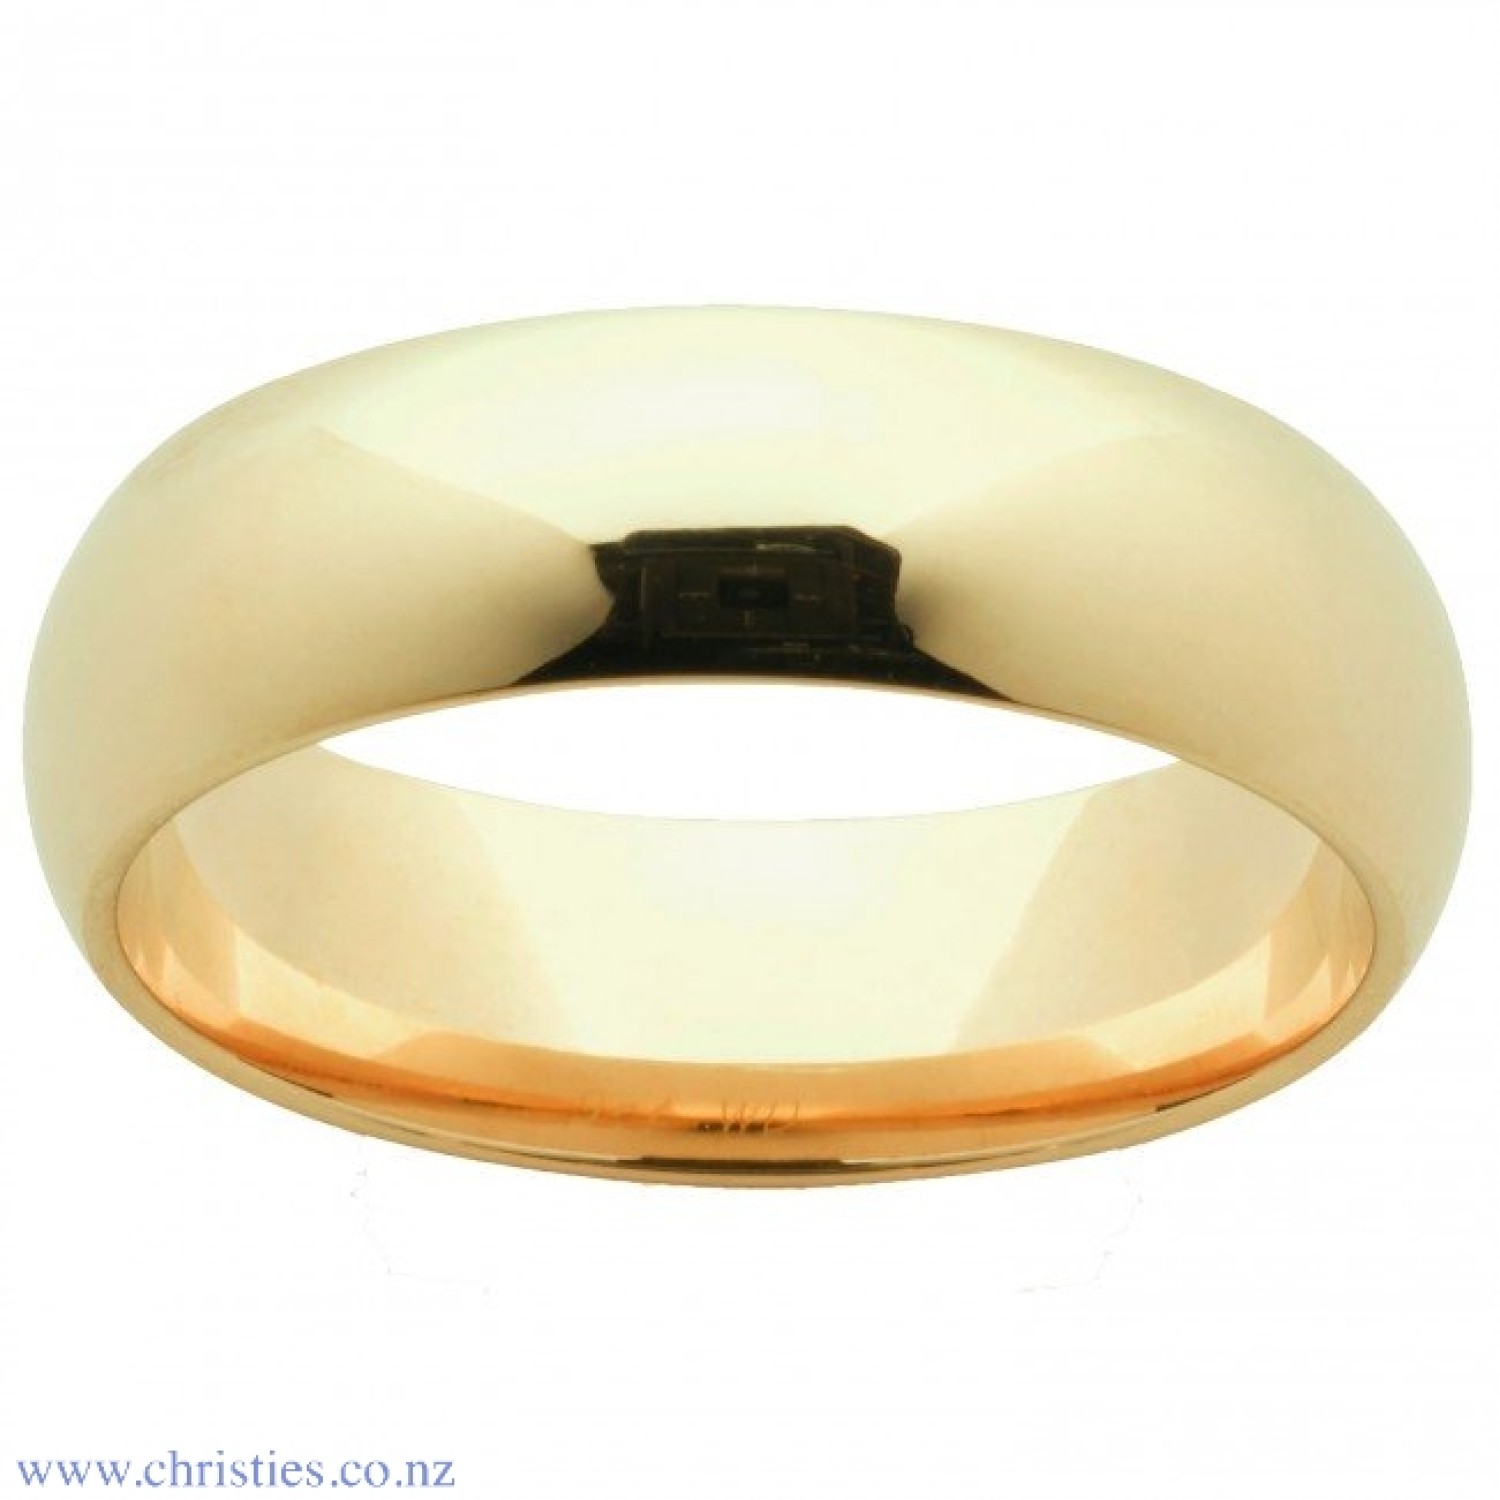 9ct Yellow Gold Wedding Ring 5.5mm. A 9ct Yellow Gold Wedding Ring 5.5mm in width LAYBUY - Pay it easy, in 6 weekly payments and have it now. Only pay the price of your purchase, when you pay your instalments on time. A late fee may be applied for @christ